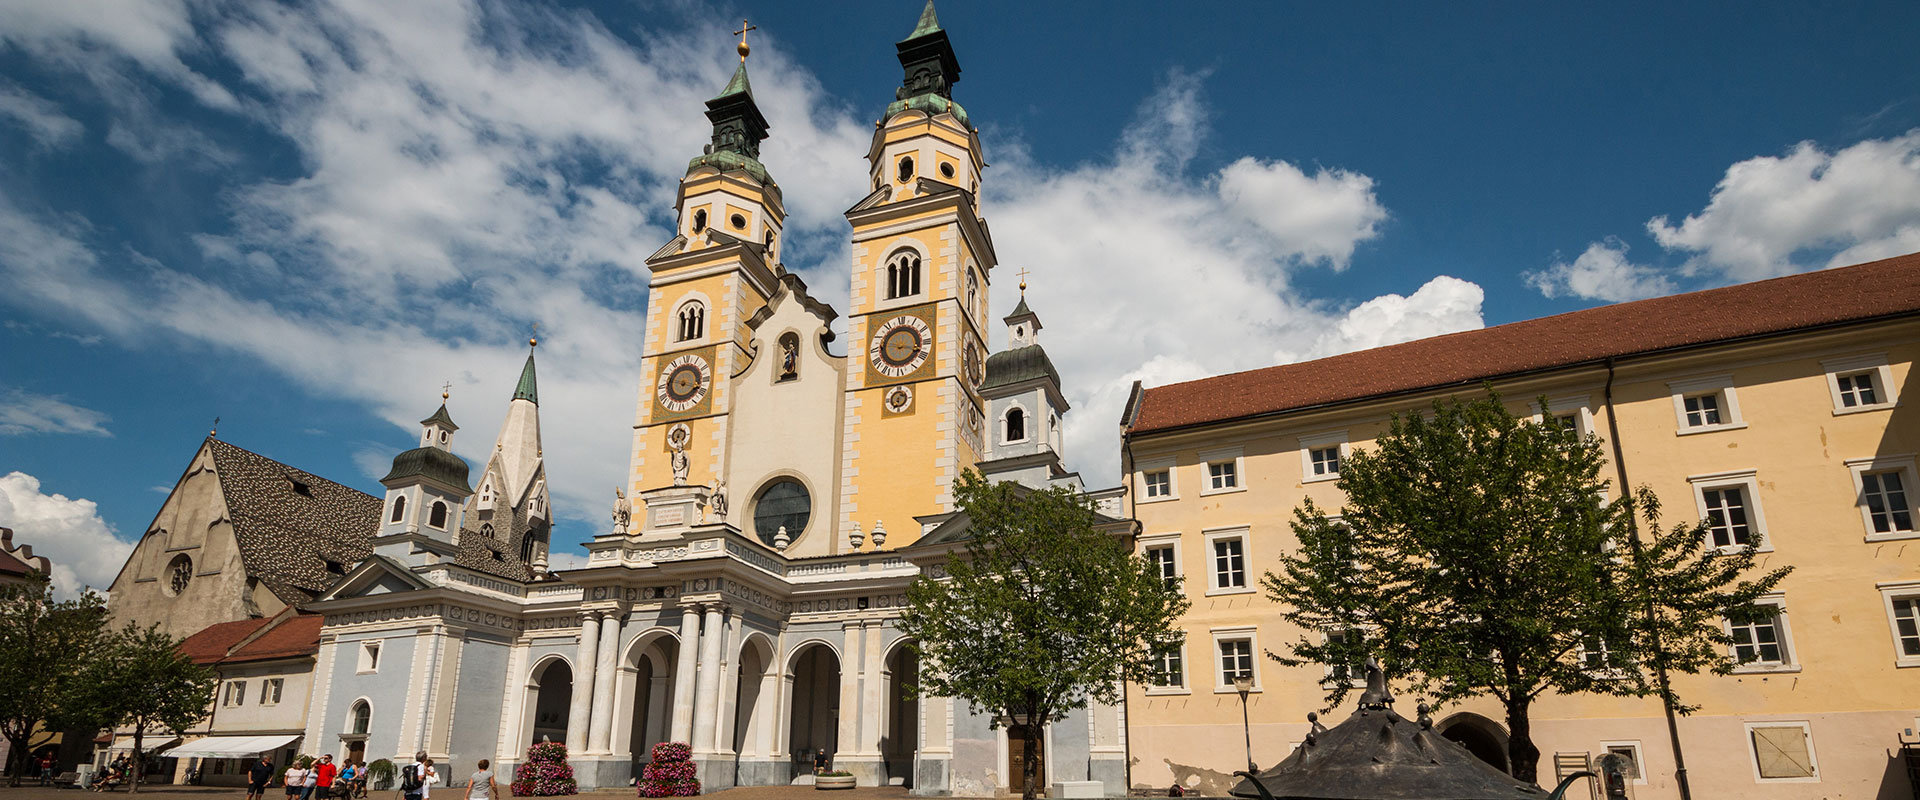 The cathedral town of Brixen